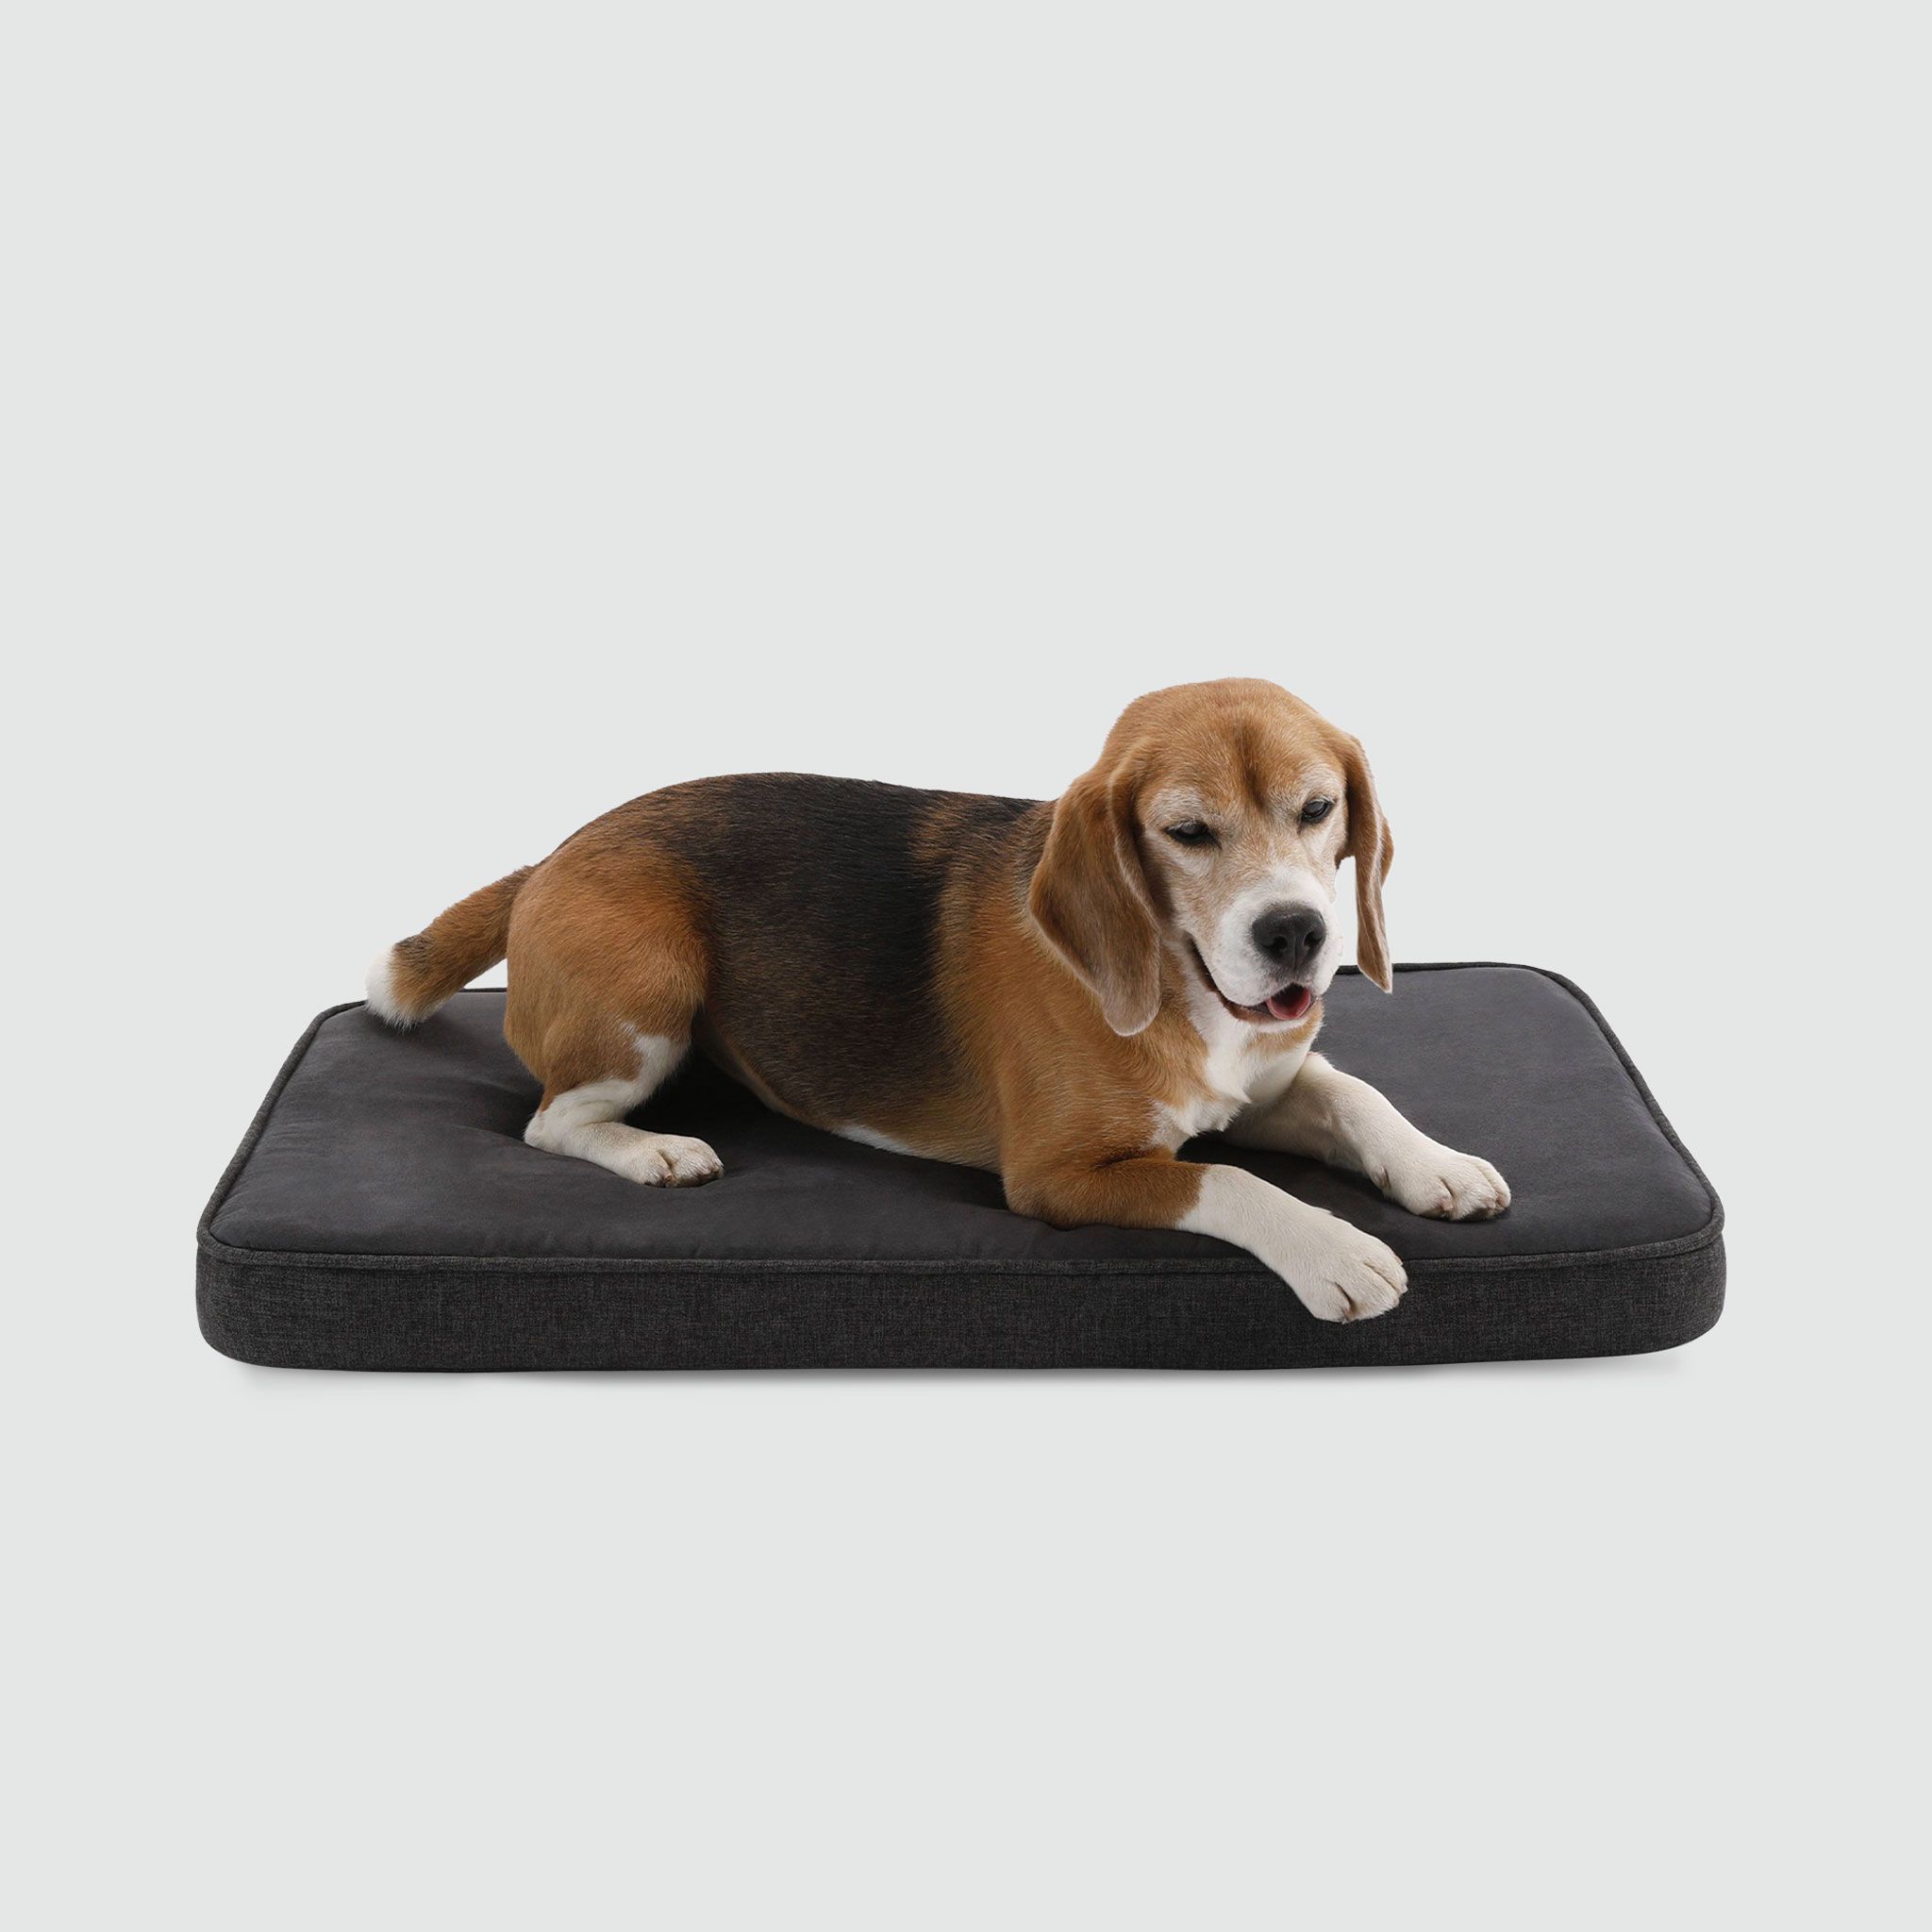 A beagle dog laying on a dog bed